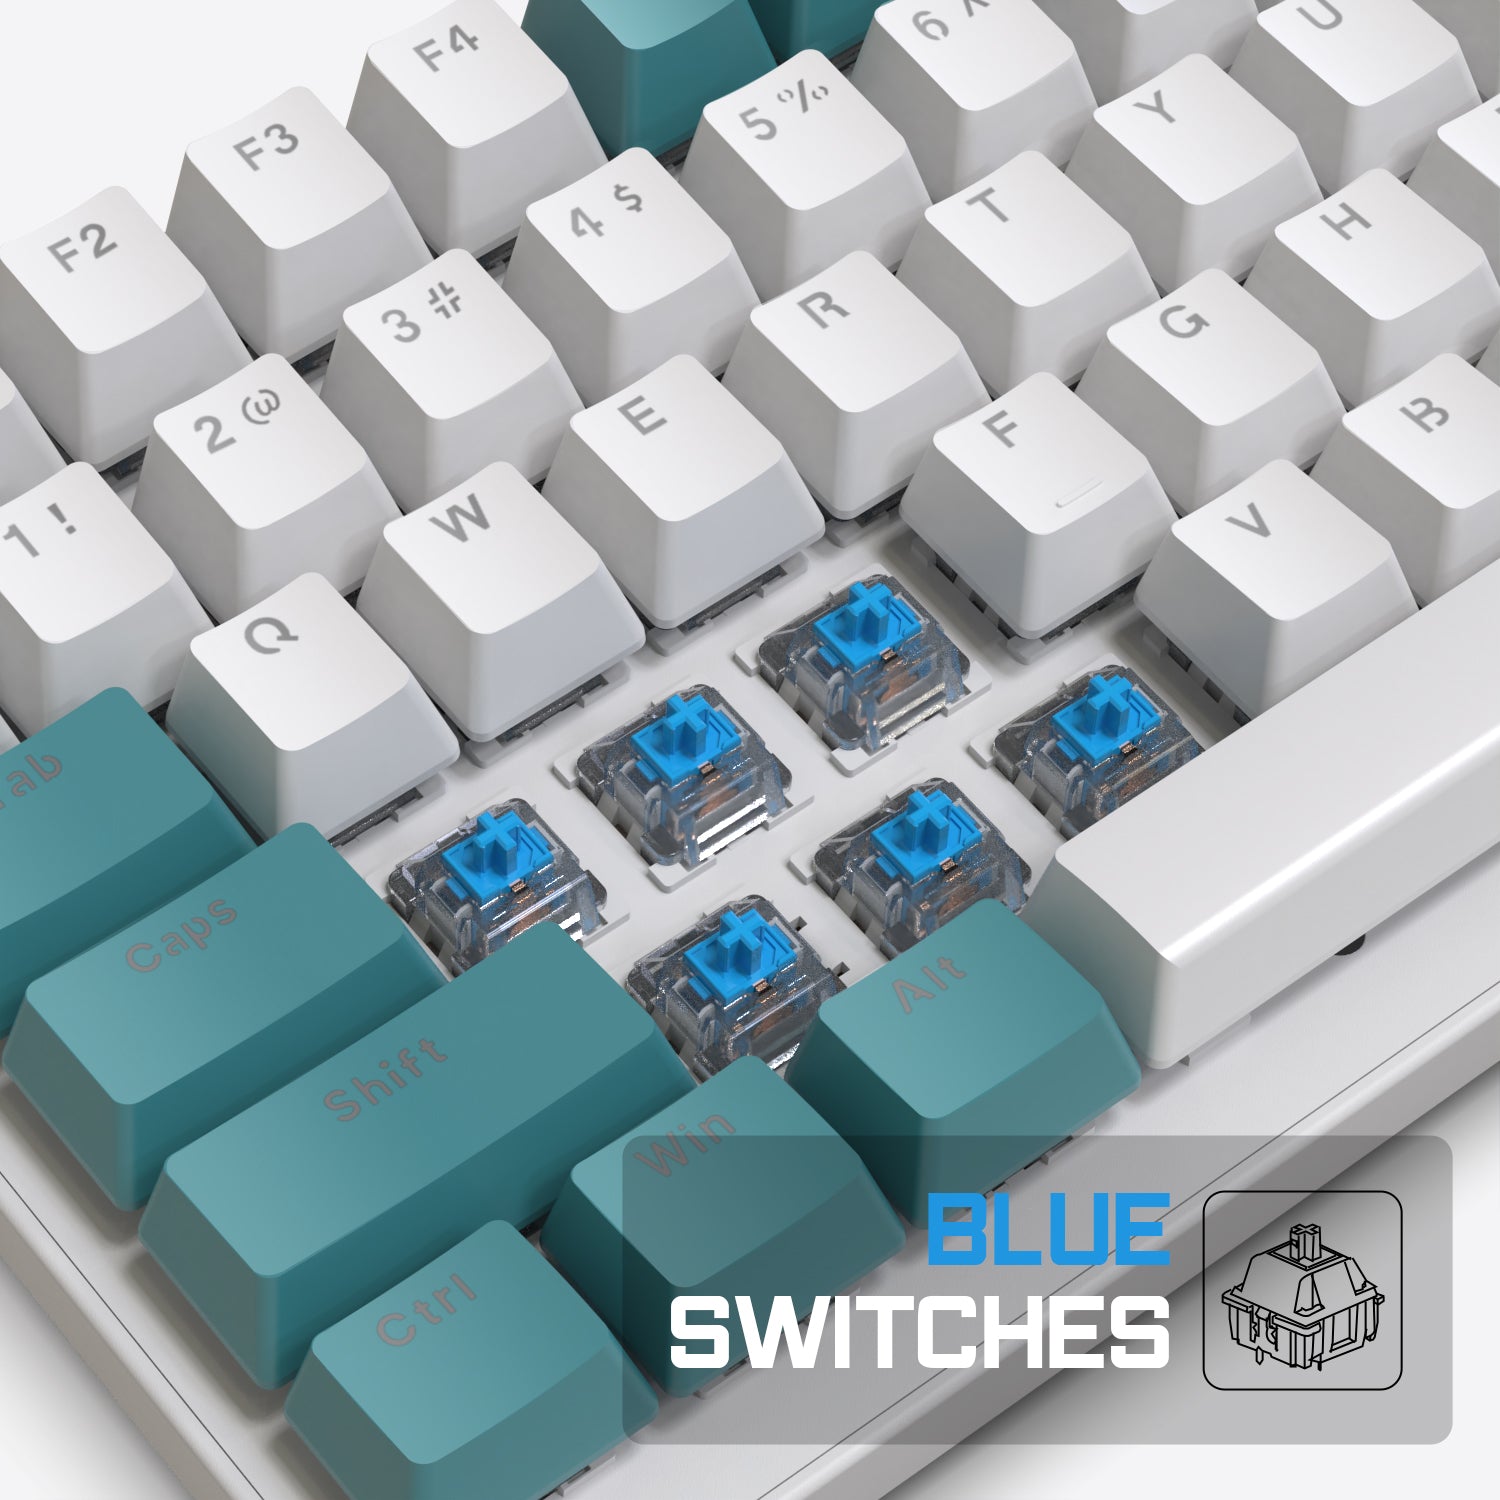 ZIYOU LANG K3 Mechanical Keyboard Ultra-Compact Mini 98-Key Wired Type C USB Water-resistant RGB Illuminated Clicky Linear Switch